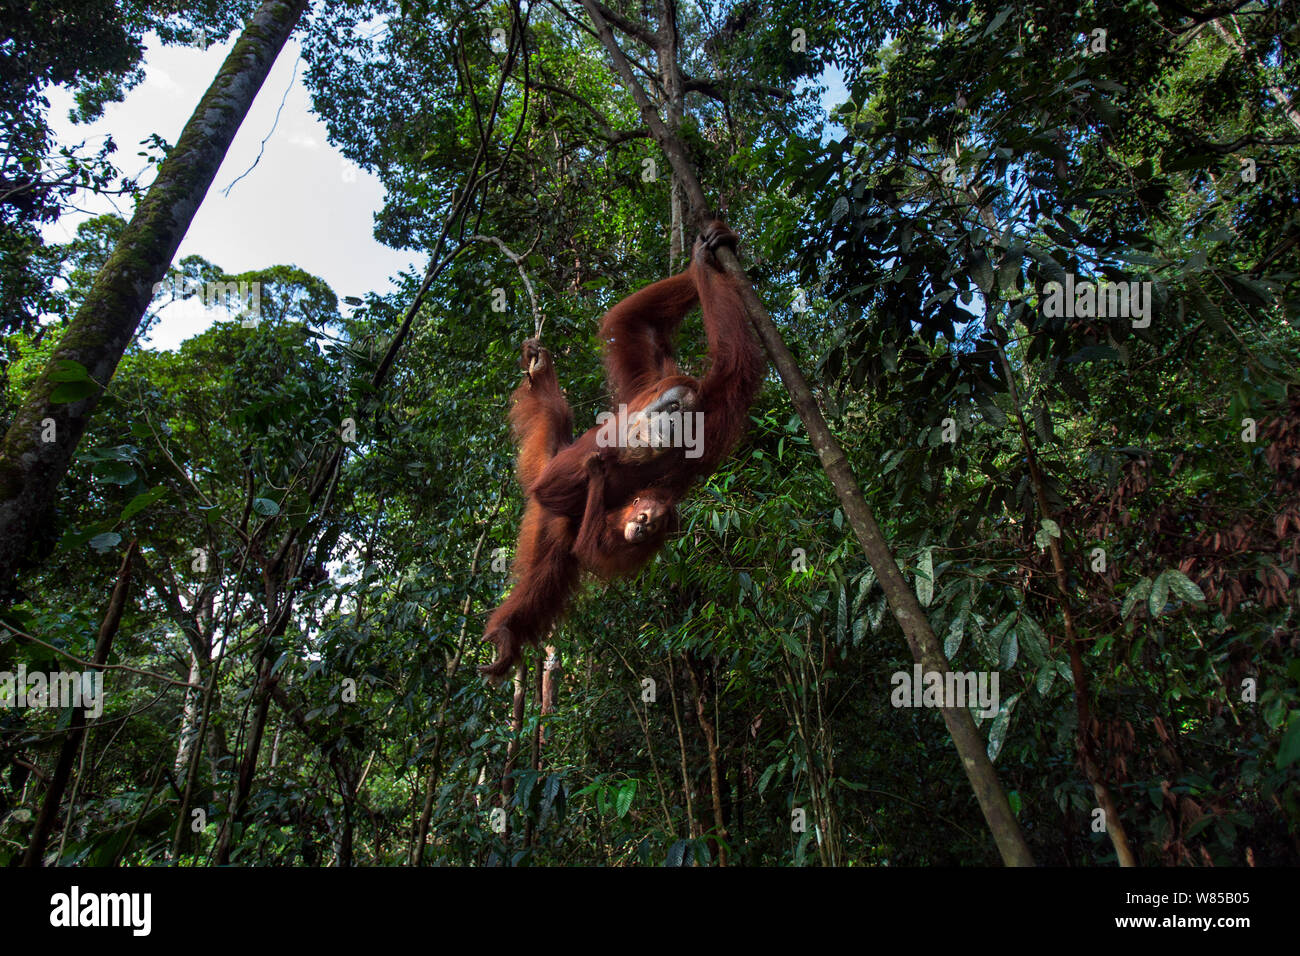 Sumatran orangutan (Pongo abelii) female 'Suma' aged 36 years and female baby 'Sumi' aged 2-3 years swinging through the trees. Gunung Leuser National Park, Sumatra, Indonesia. Rehabilitated and released (or descended from those which were released) between 1973 and 1995. Stock Photo